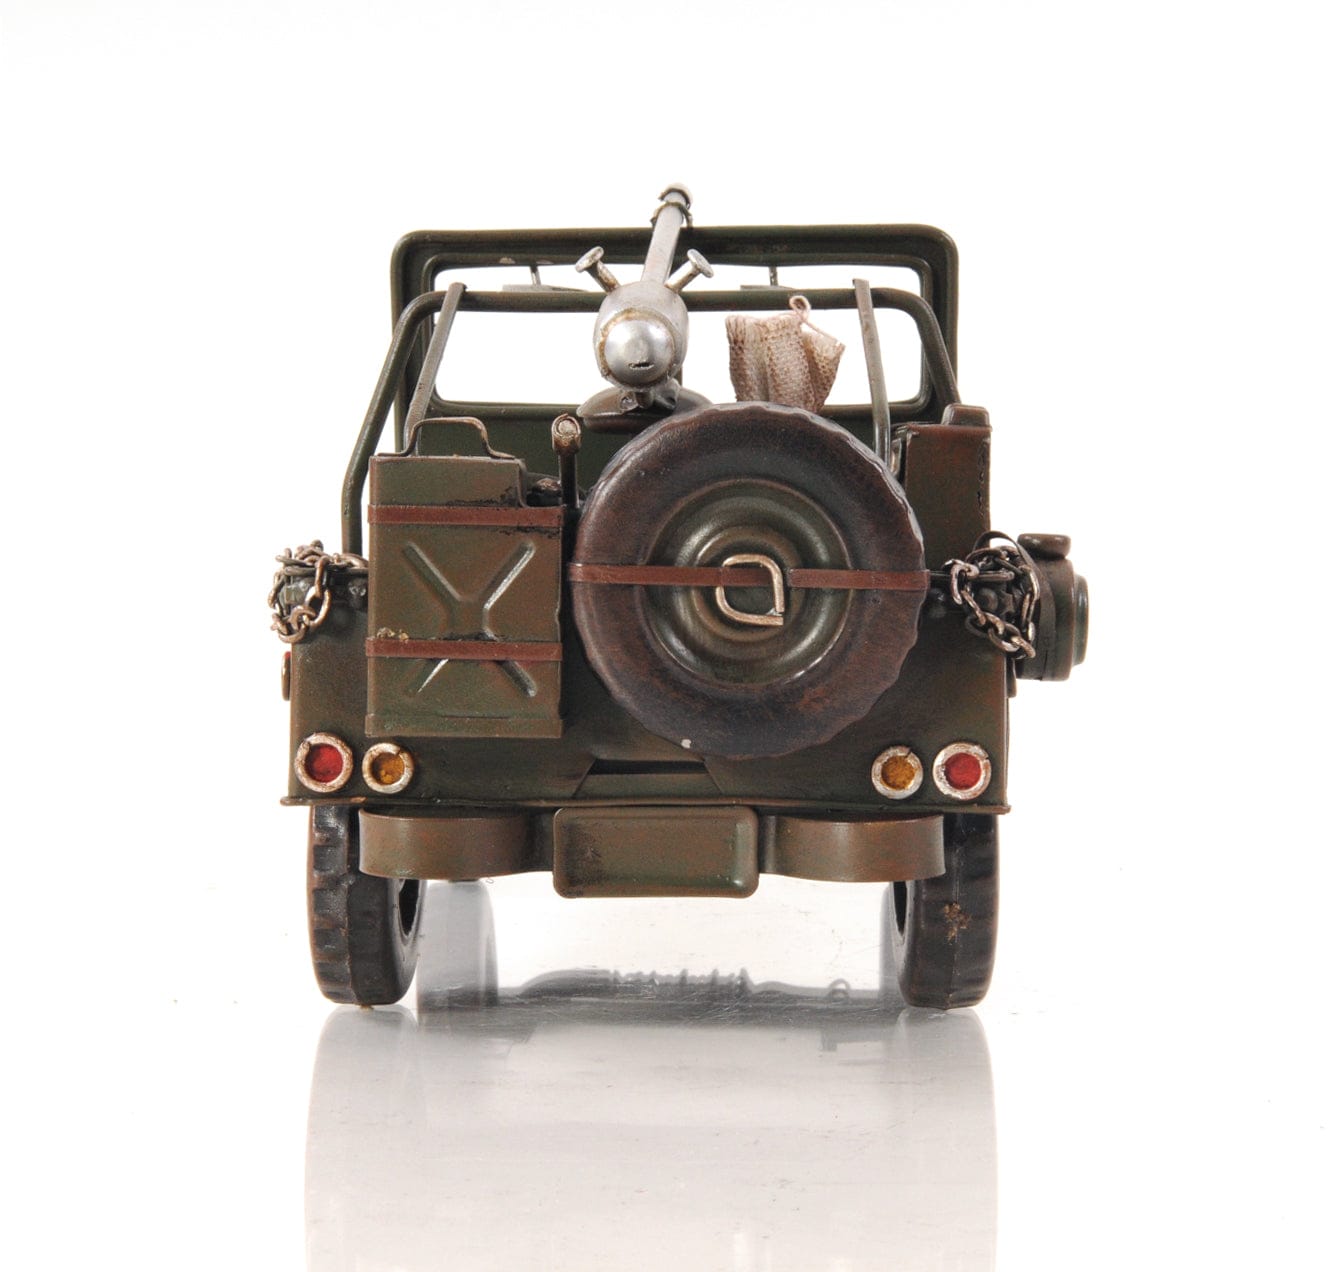 ALDO Decor > Artwork > Sculptures & Statues L: 11 W: 6.5 H: 6 Inches / NEW / iron US Army Green 1940 World War II Era Willys MB Overland Jeep Car Metal Model